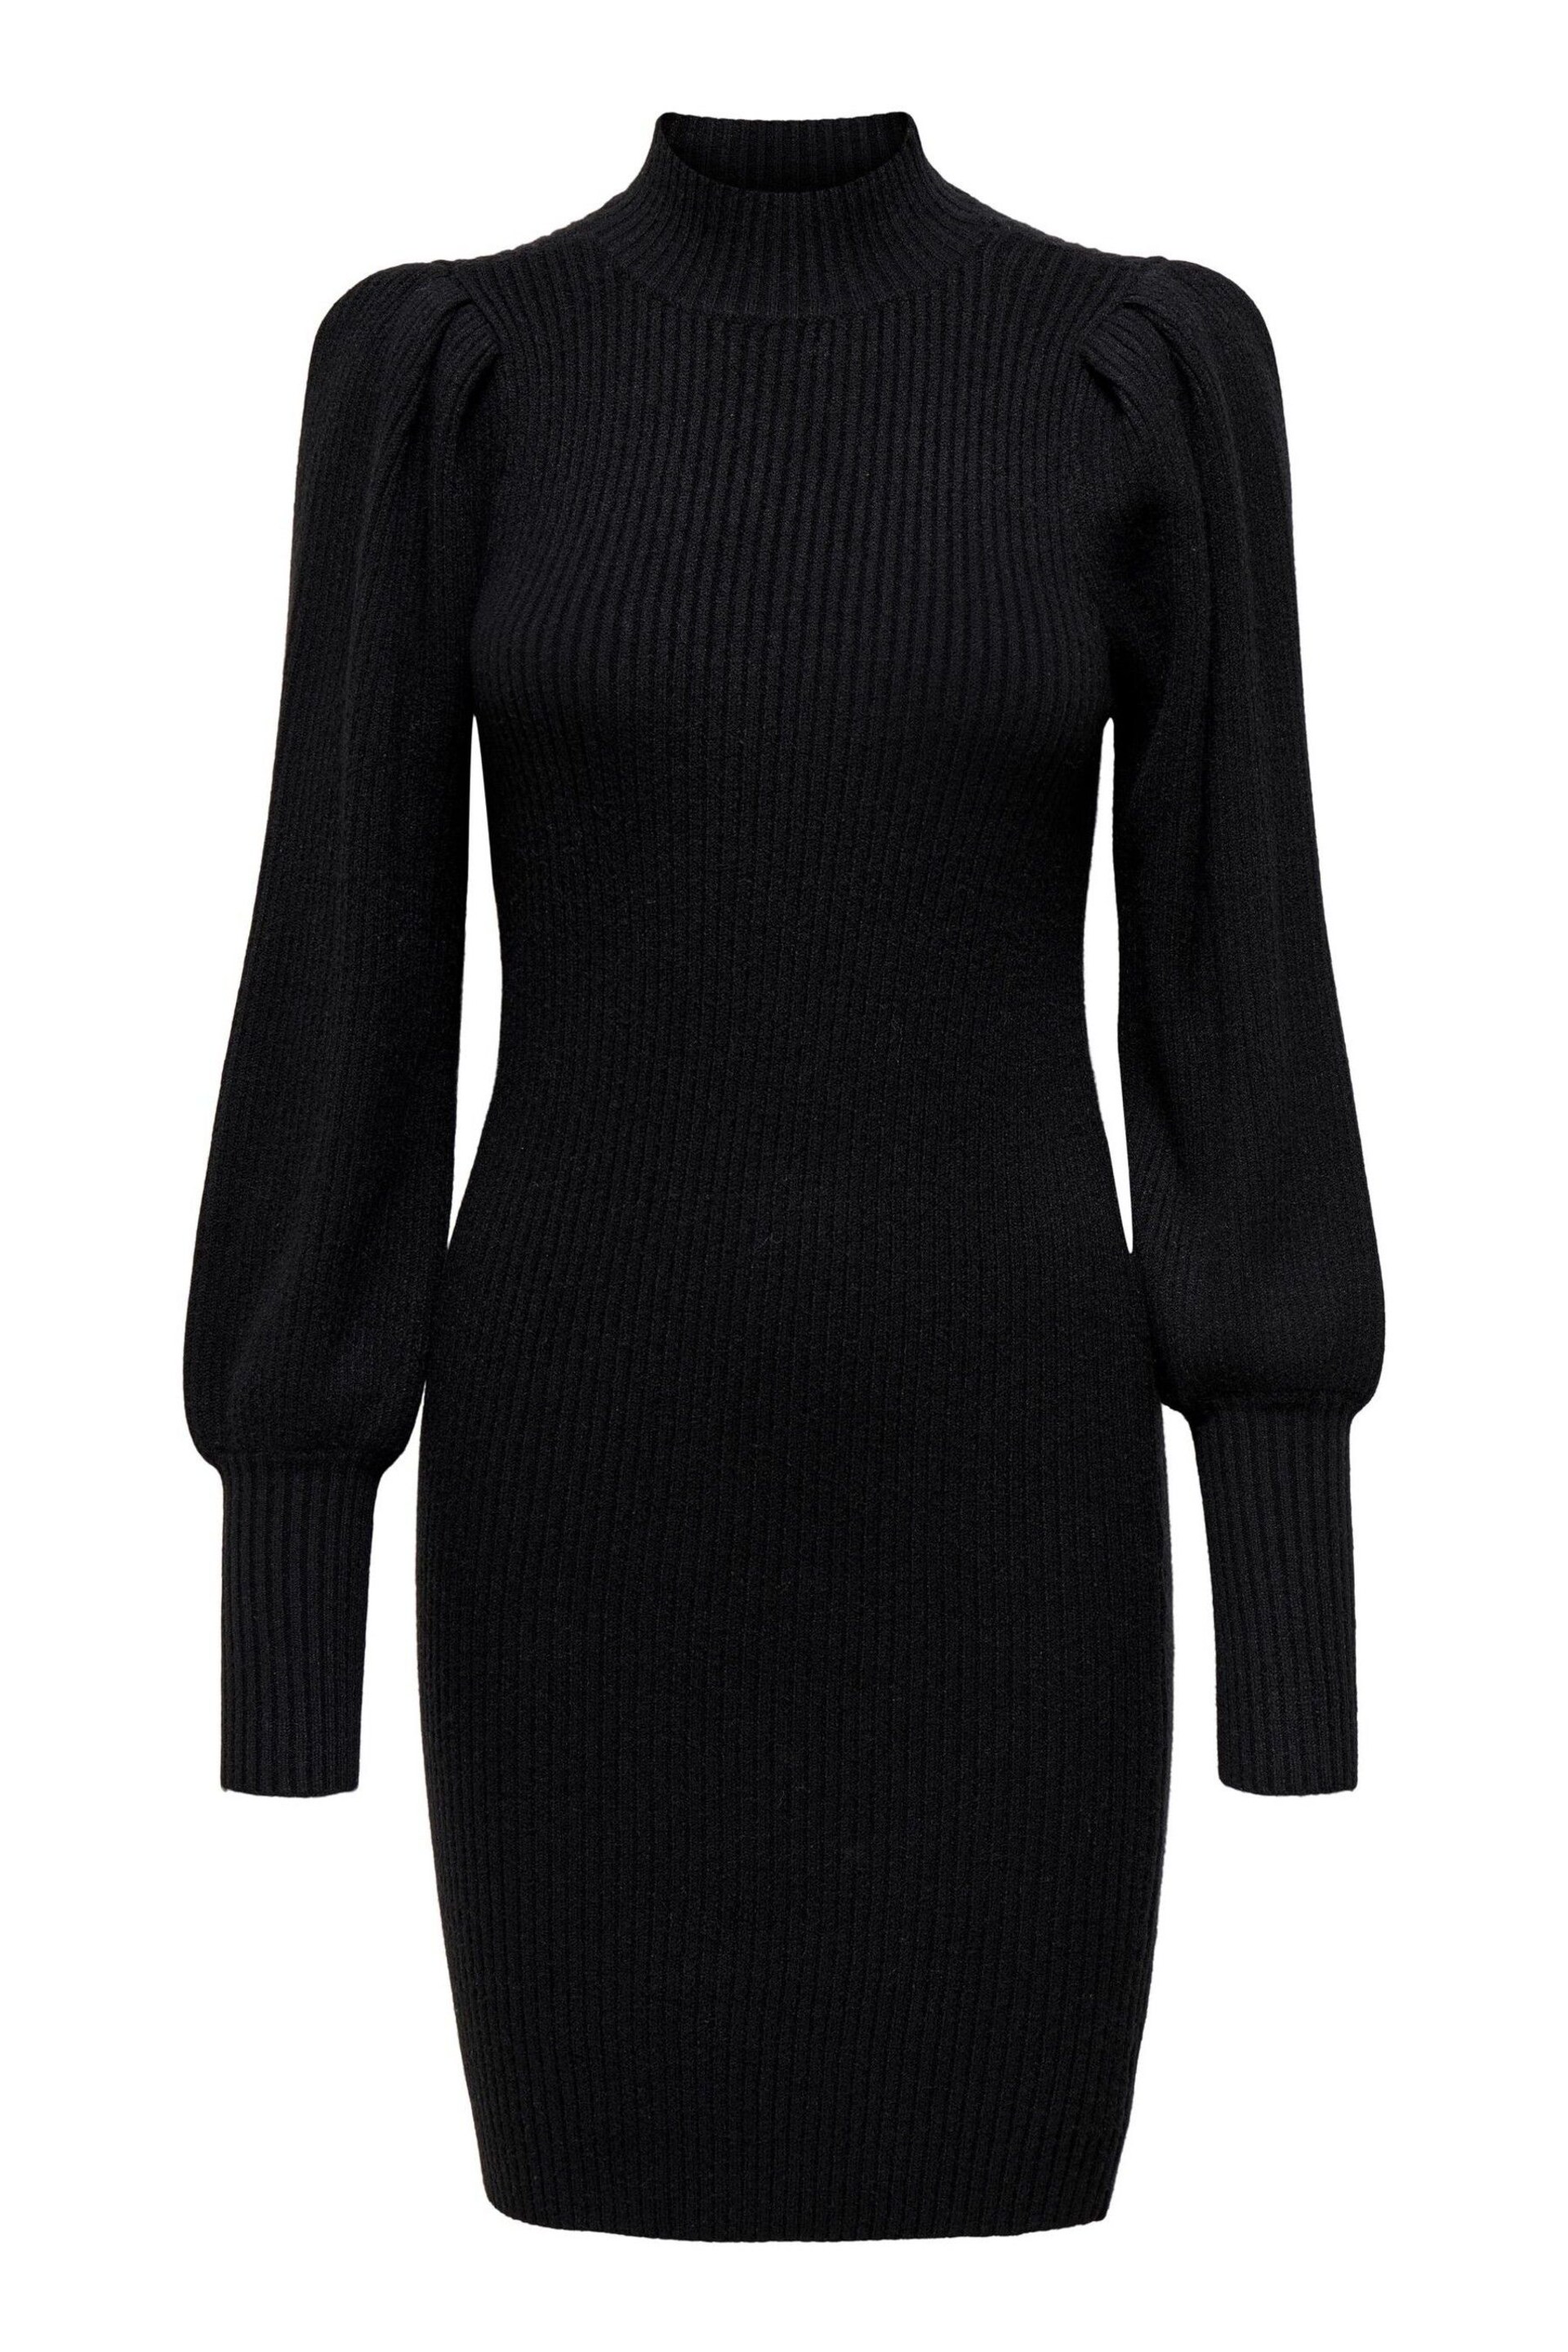 ONLY Black Puff Sleeve Knitted Jumper Dress - Image 5 of 5